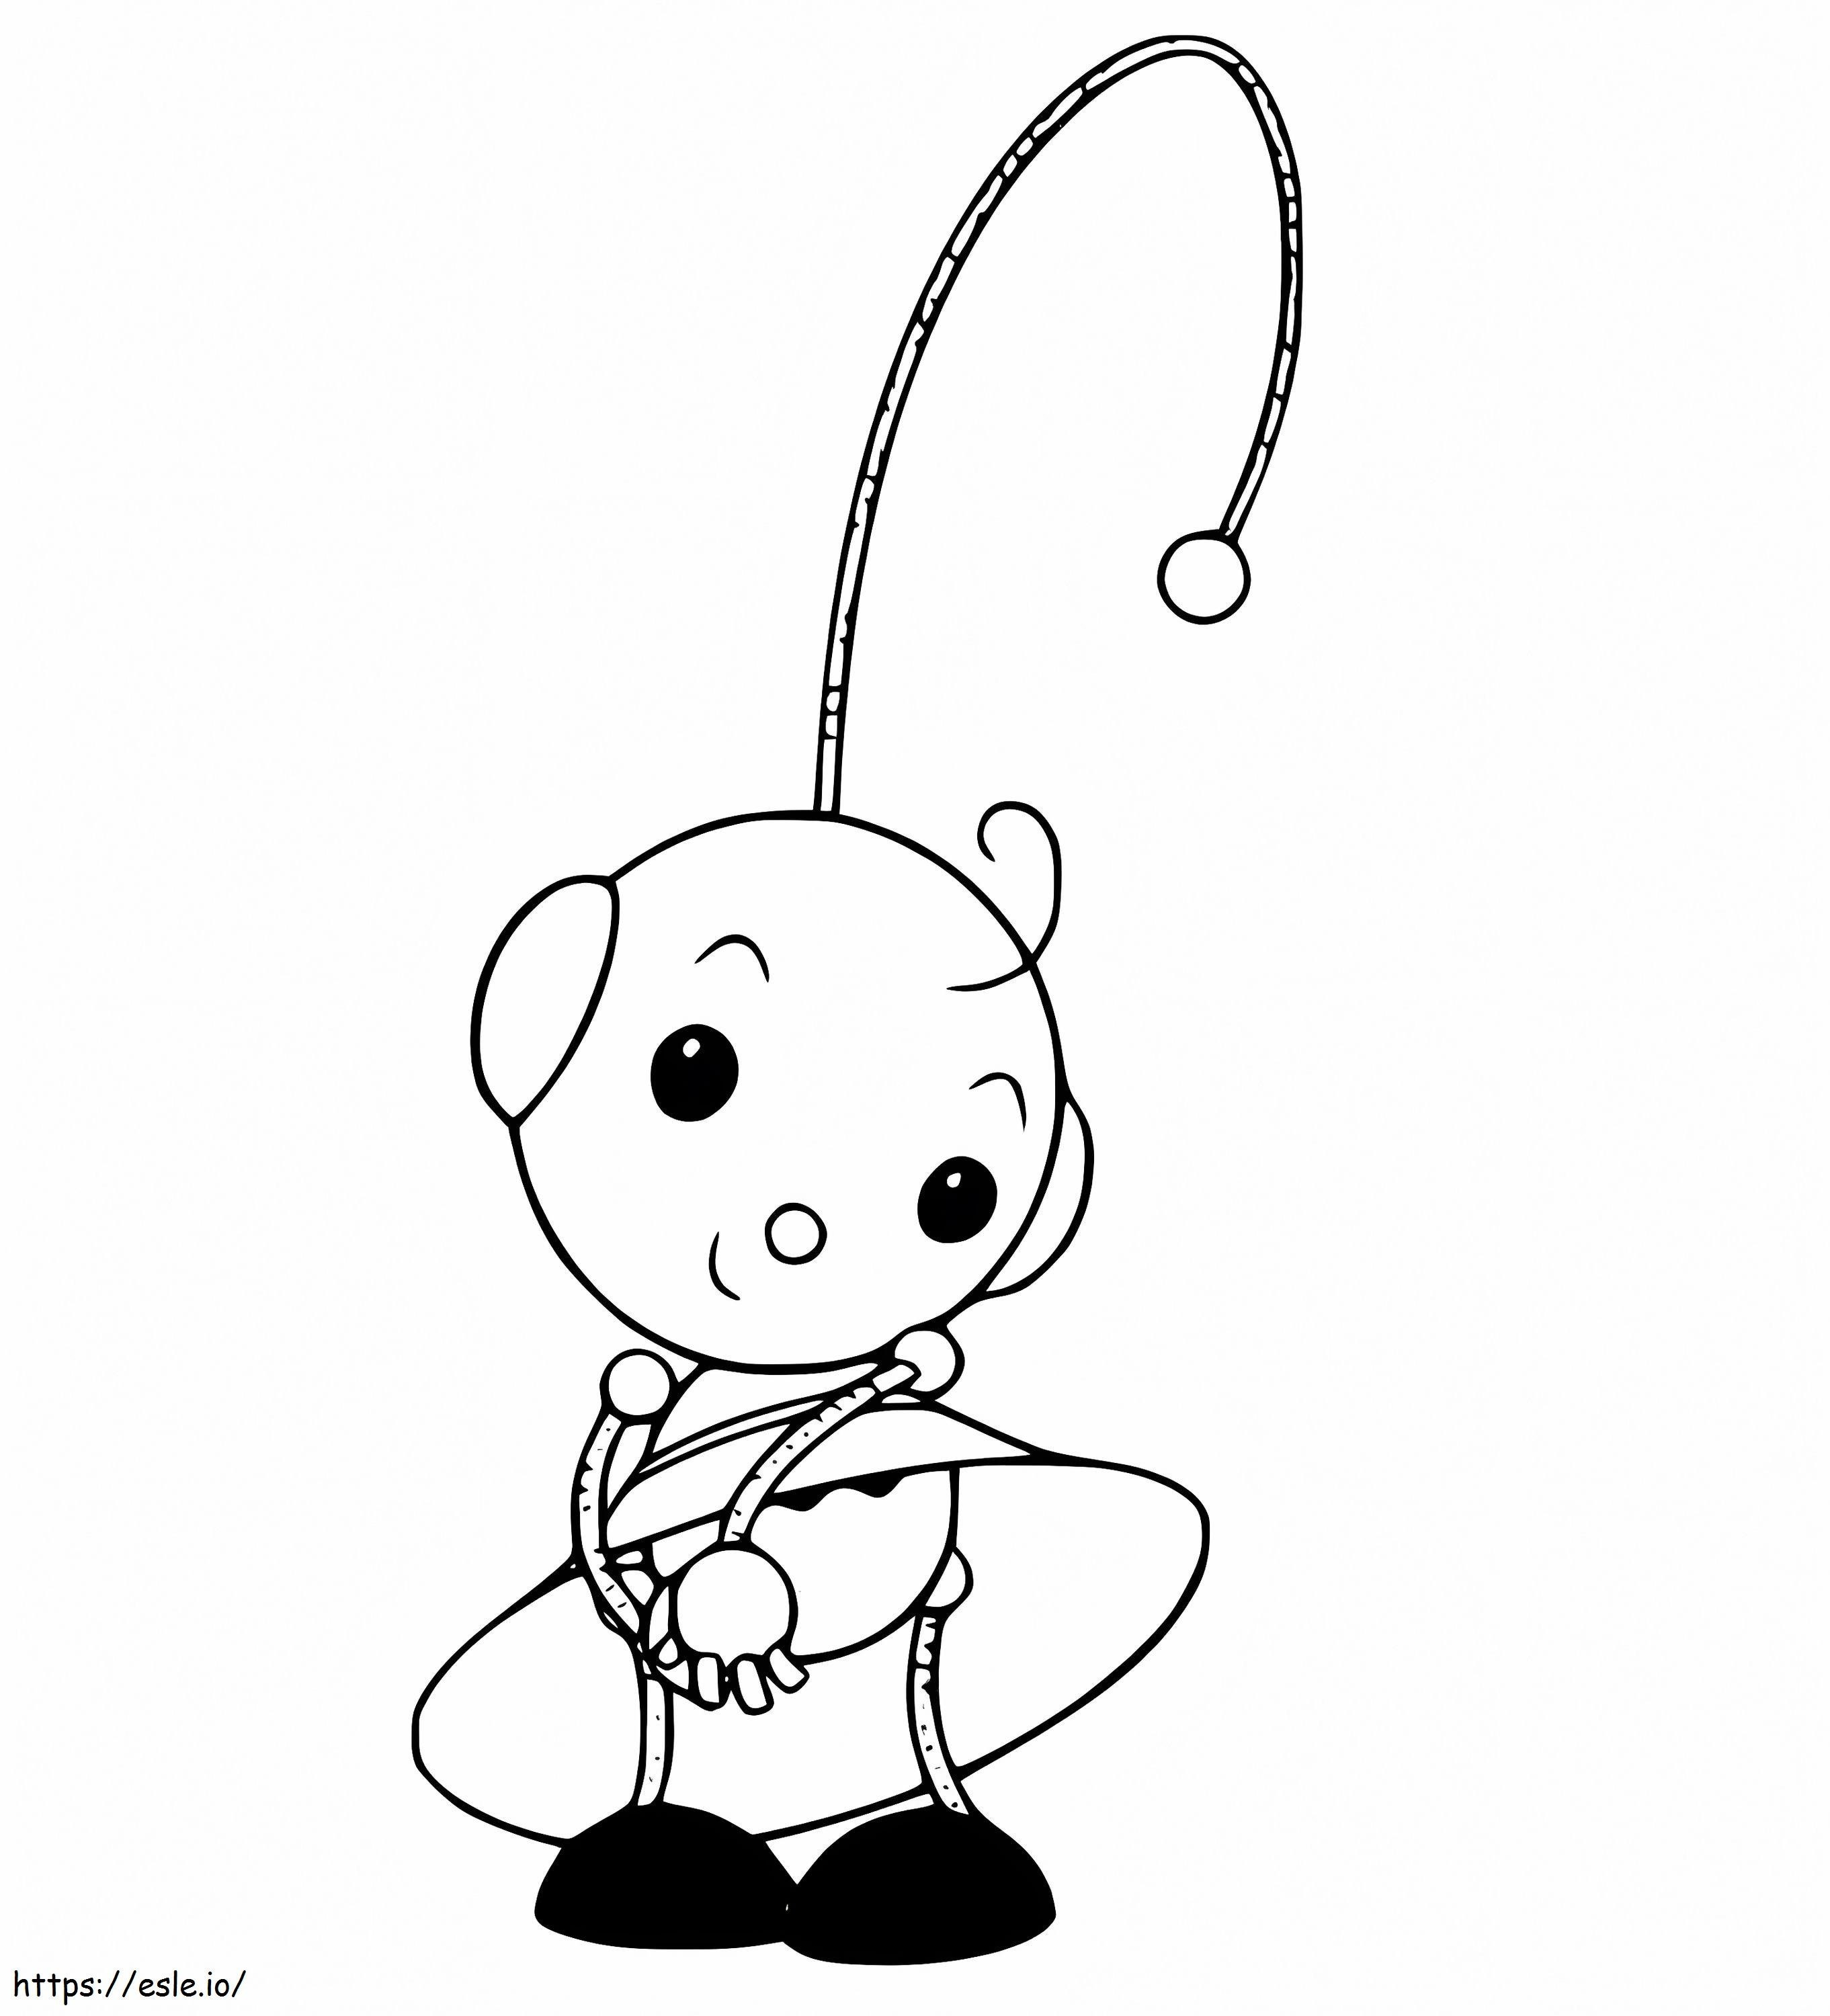 Adorable Zowie Polie coloring page